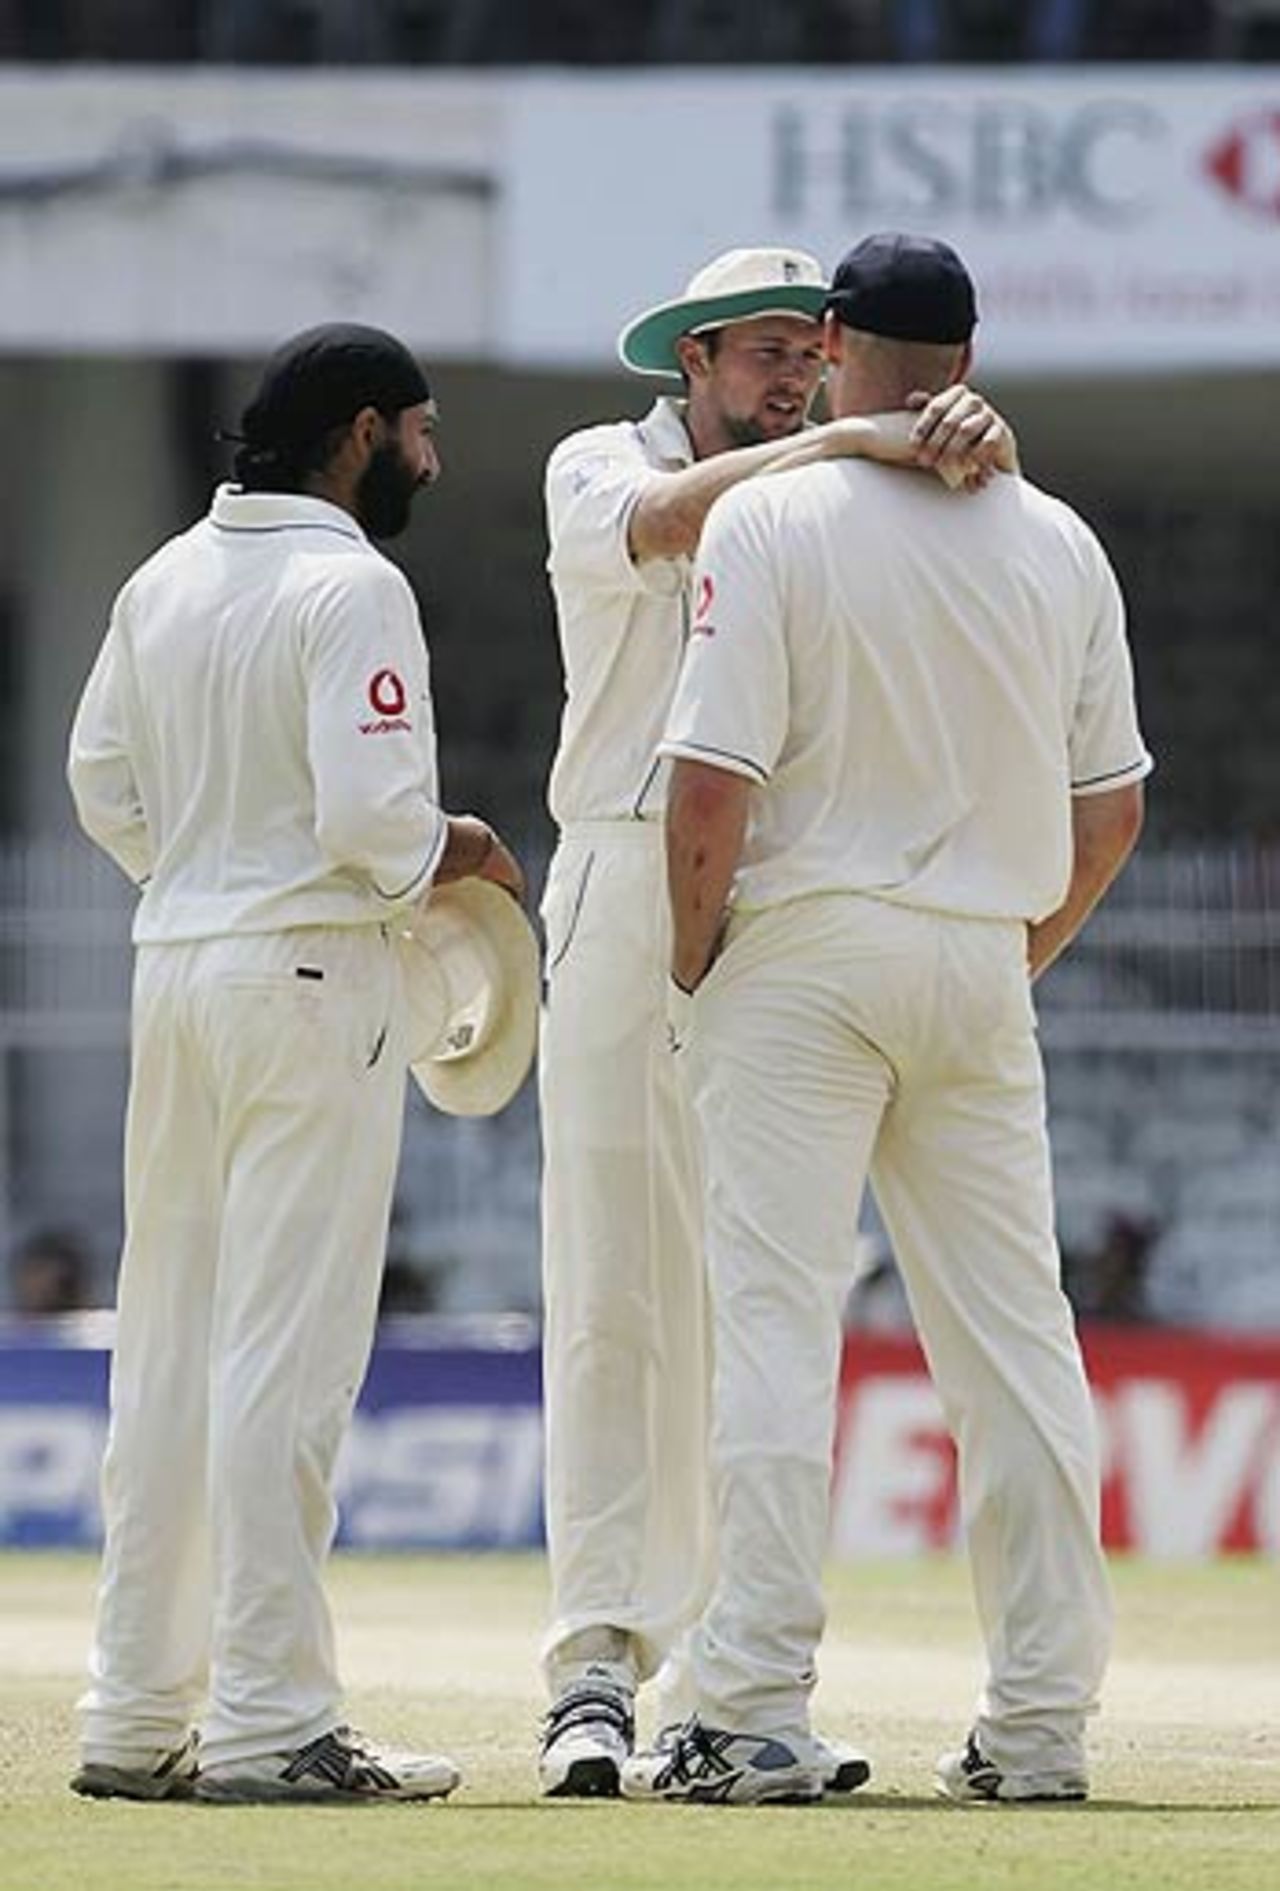 Steve Harmison has a chat with Andrew Flintoff as Monty Panesar looks on, India v England, 1st Test, Nagpur, March 5, 2006